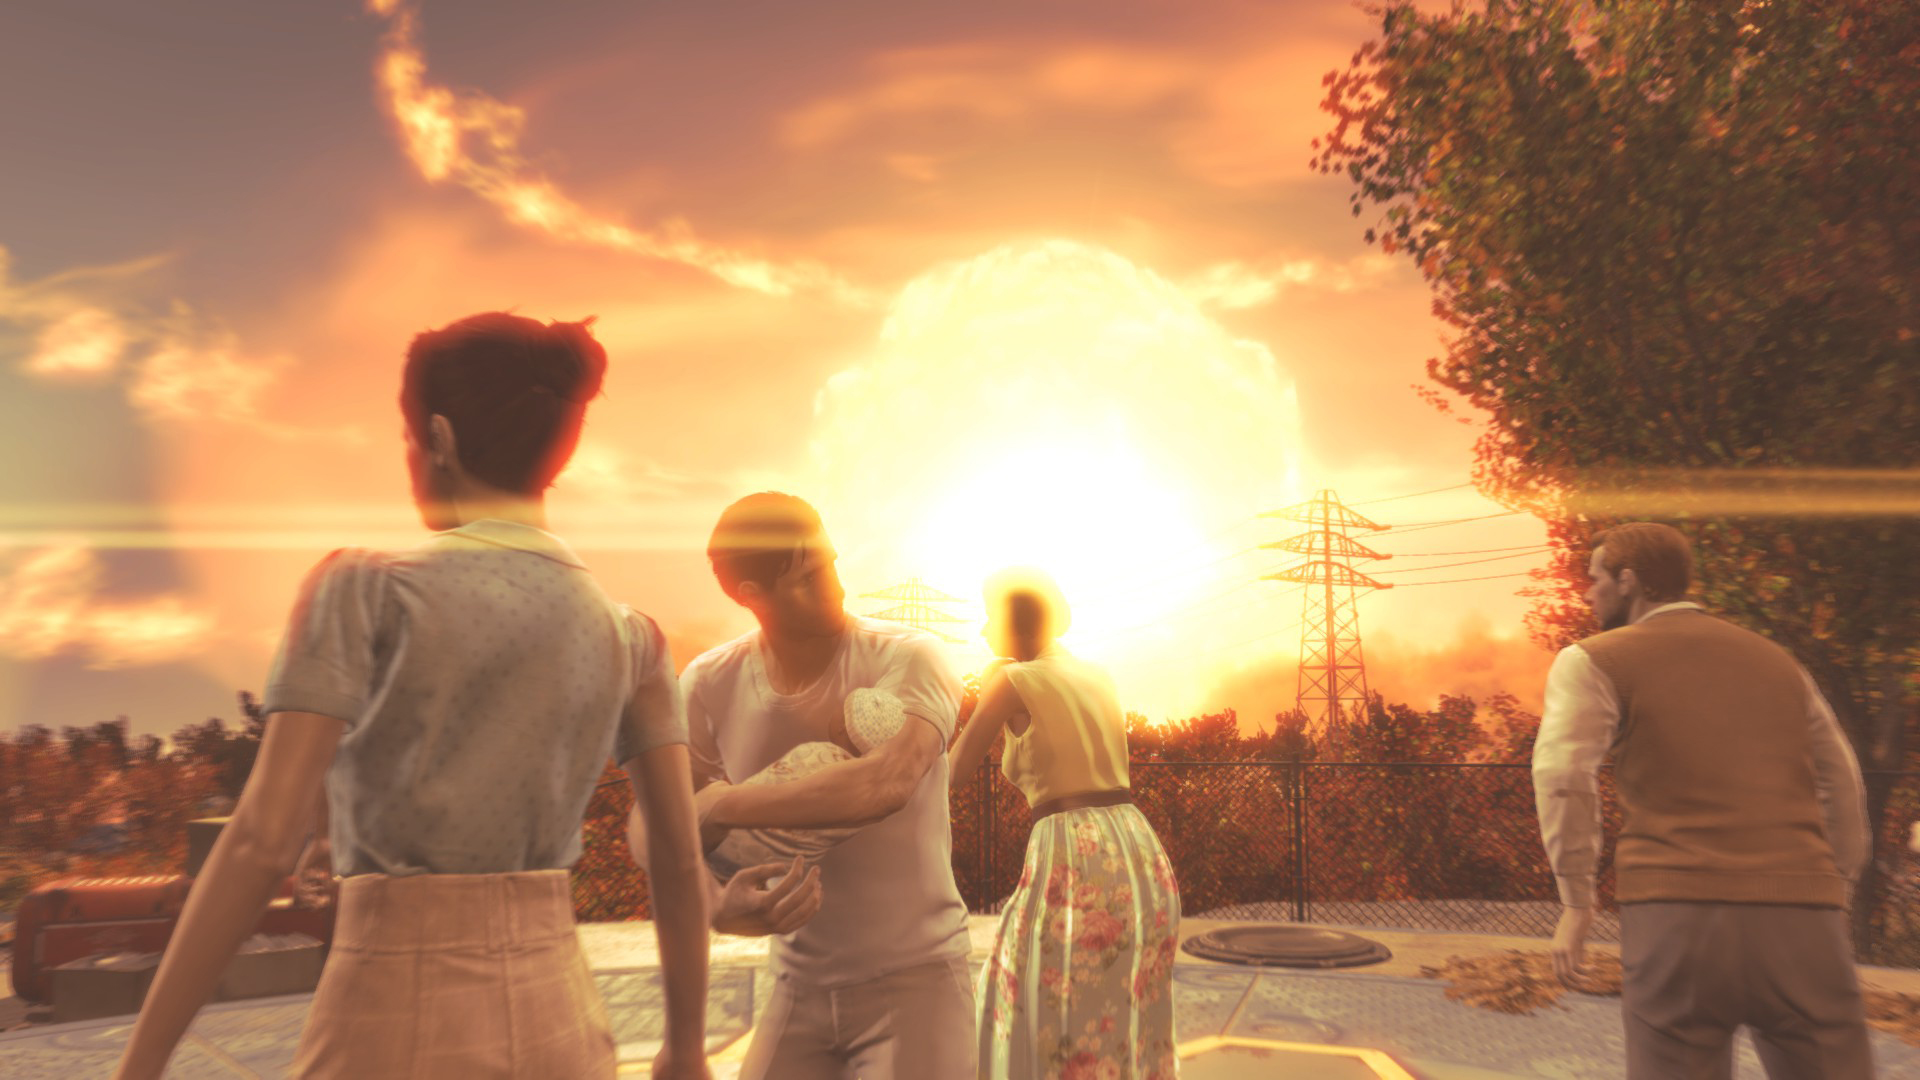 Fallout HD Wallpaper Nuclear Explosion